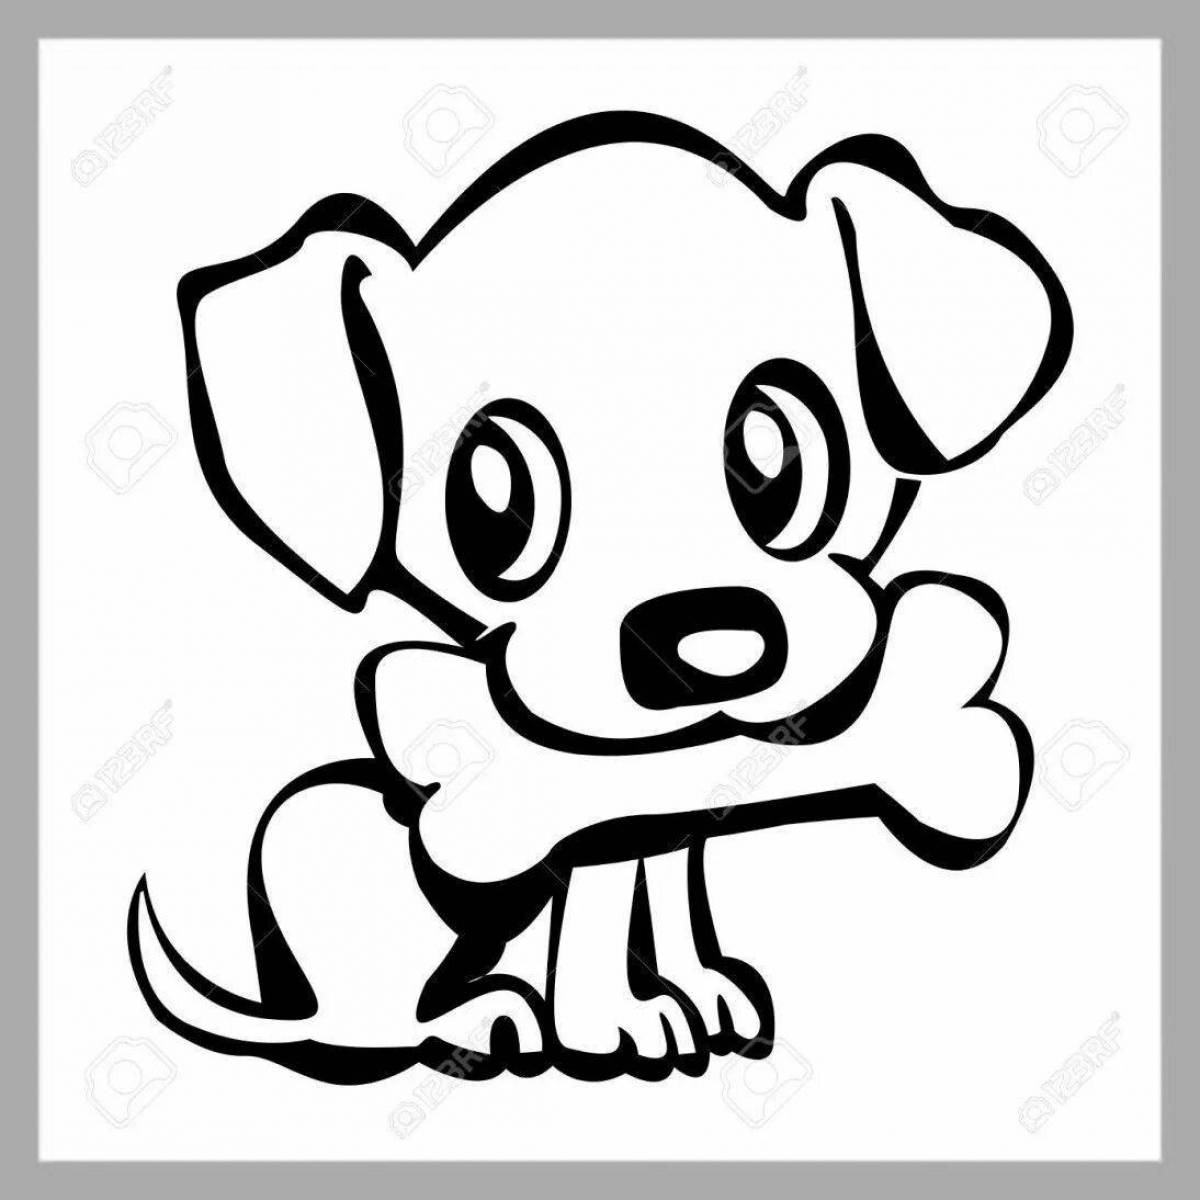 Coloring page adorable light dog